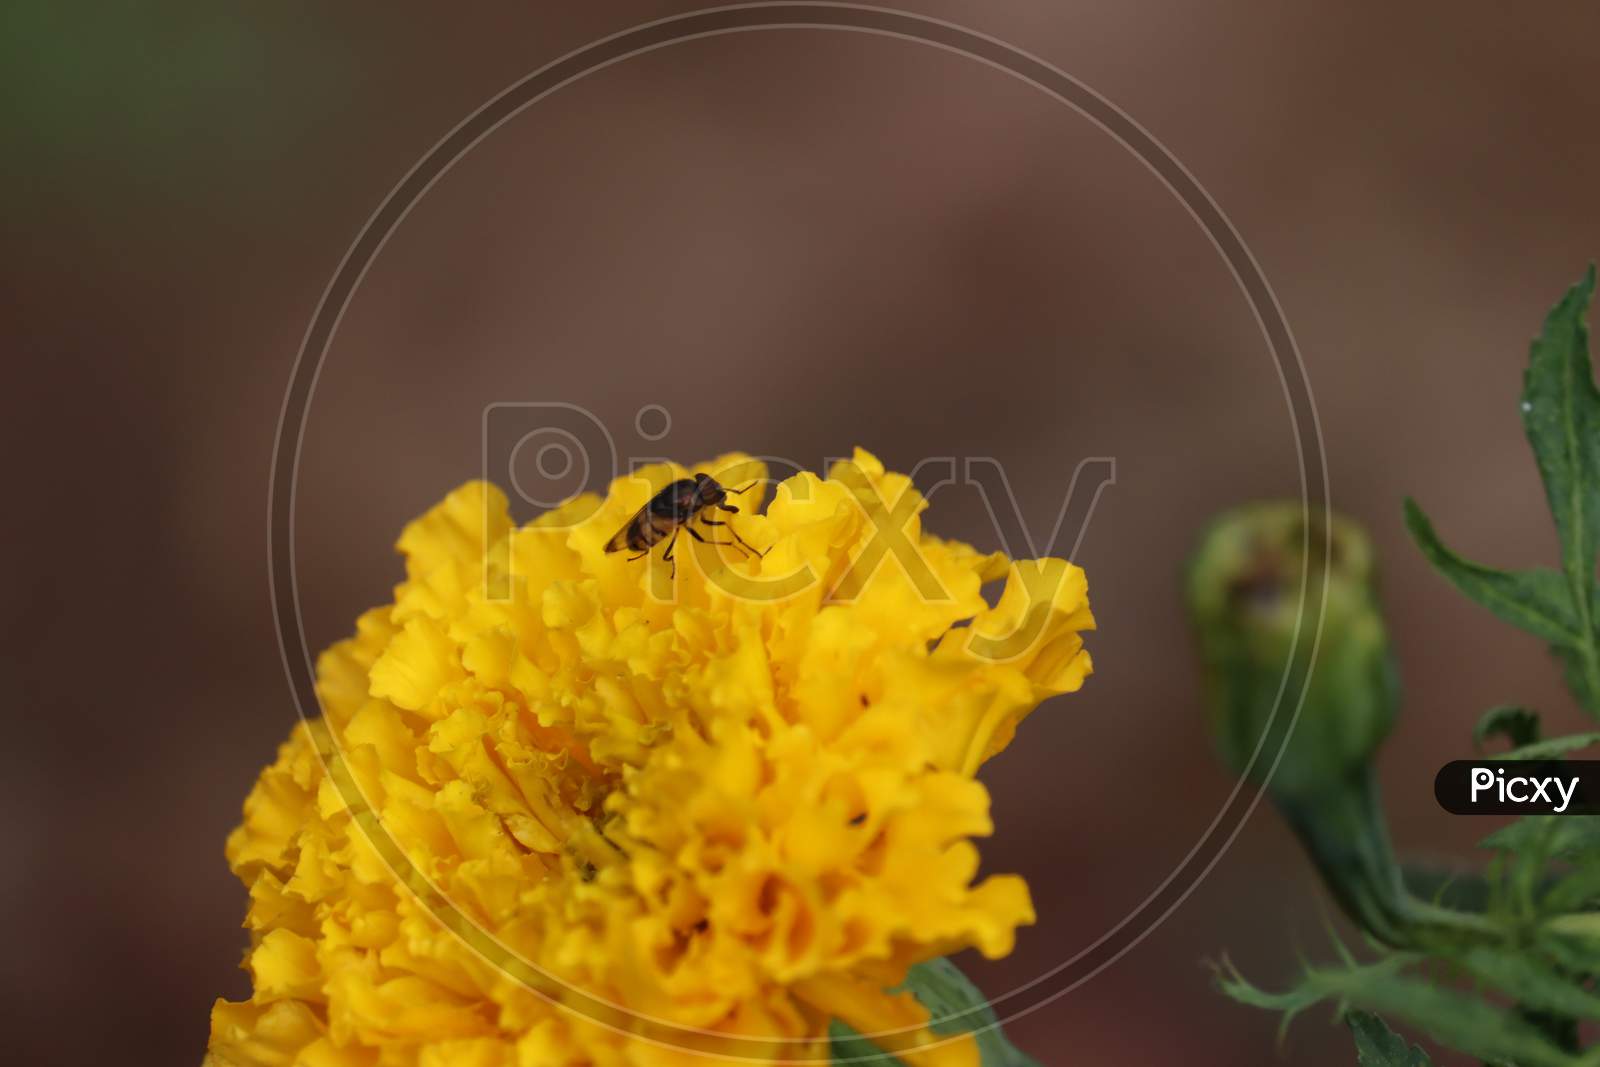 Honey Bee (Fly) Collecting Pollen On Yellow Marigold Flower .Rajasthan, India